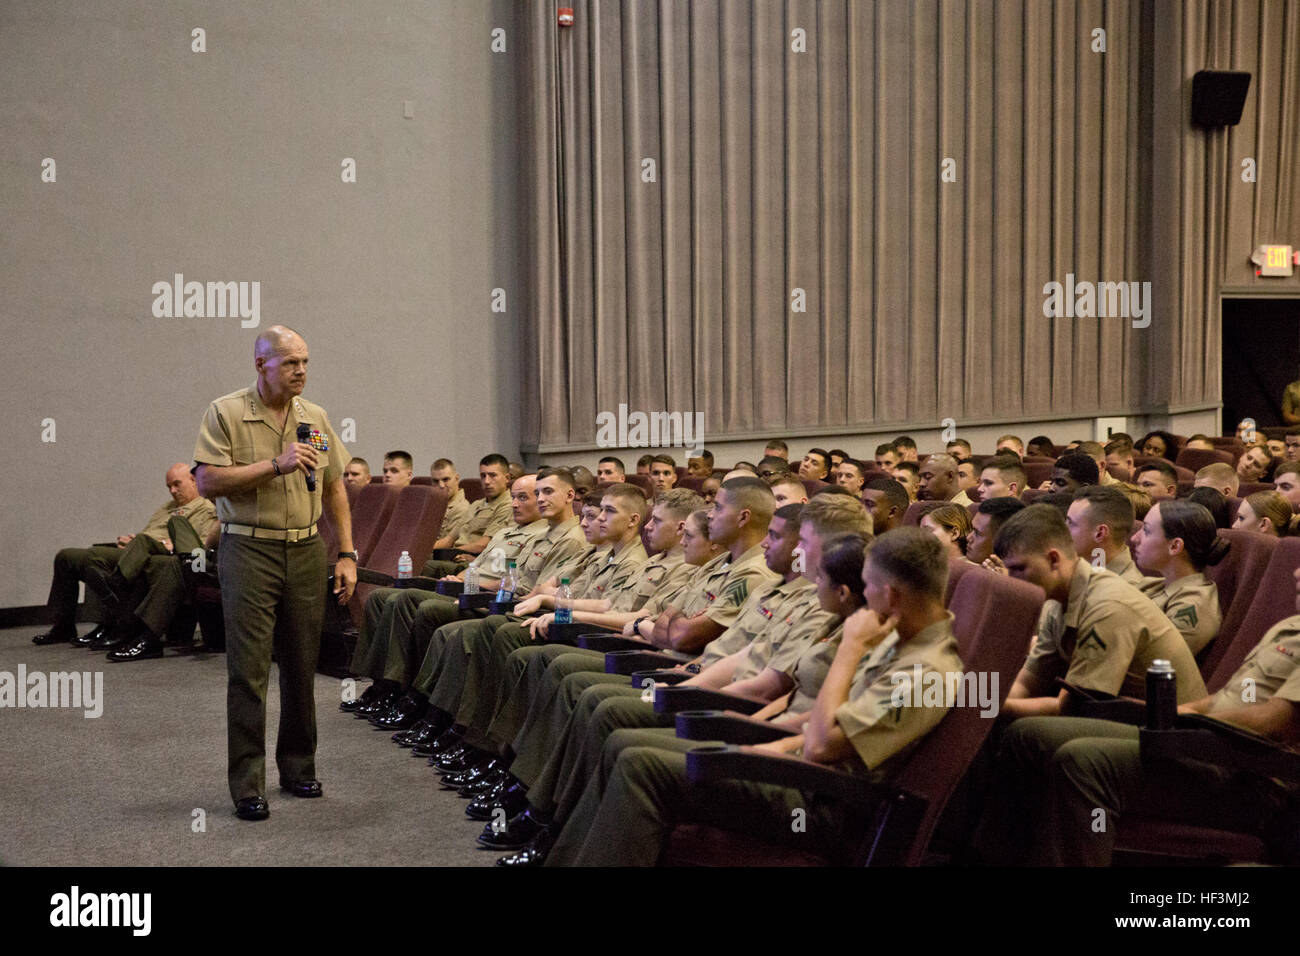 Commandant of the Marine Corps Gen. Robert B. Neller, left, speaks to Marines at Marine Corps Air Station Beaufort, S.C., Oct. 16, 2015. Neller outlined the Corps' current priorities and expectations, and listened to and answered questions during his visit. (U.S. Marine Corps photo by Sgt. Gabriela Garcia/Released) CMC Visits MCRD Parris Island and MCAS Beaufort 151016-M-SA716-281 Stock Photo